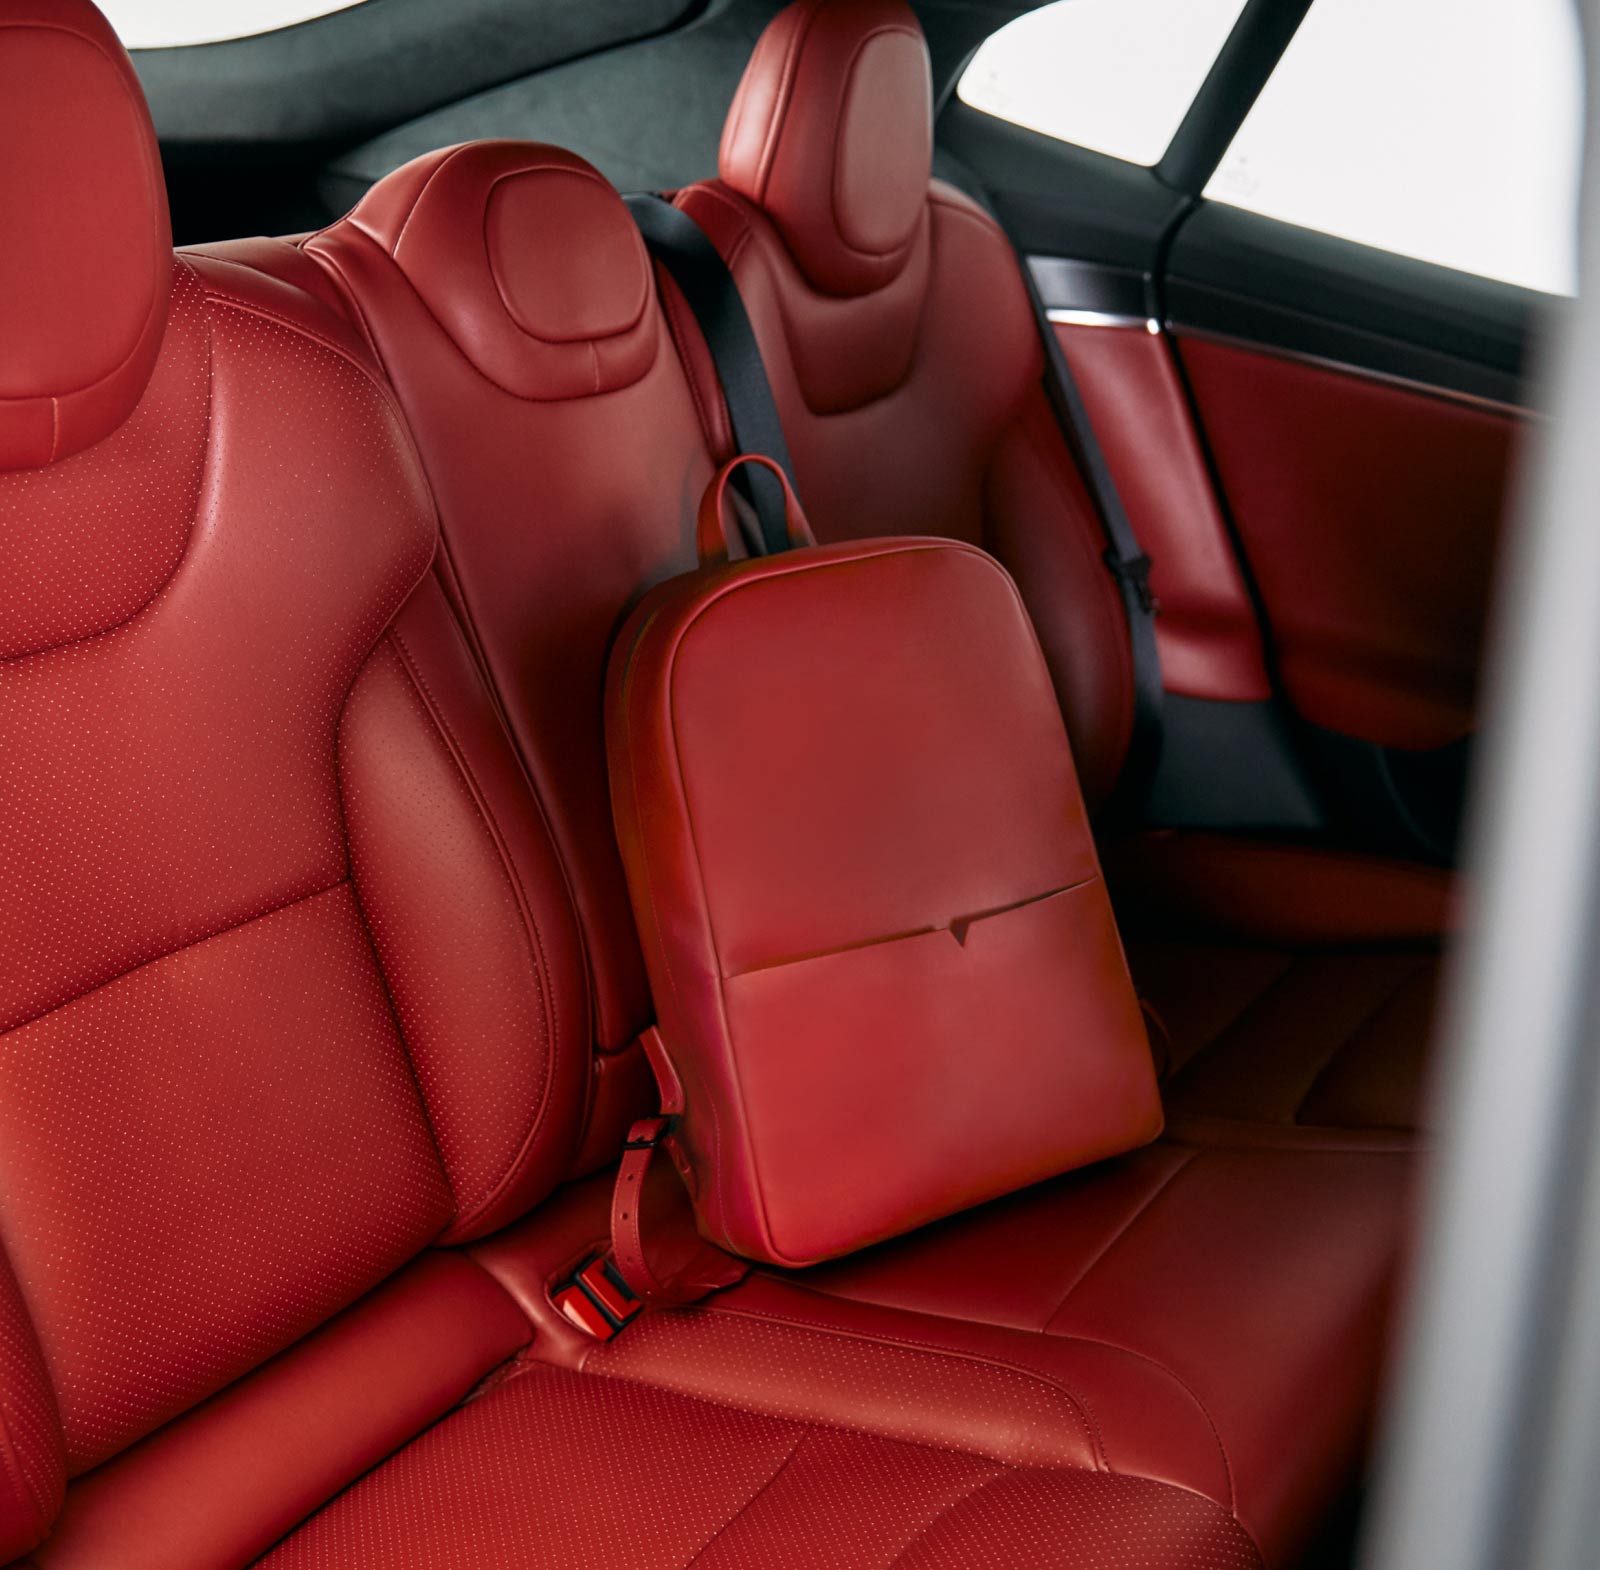 Back seat of a Tesla Model S with custom Serrano Red interior and matching backpack